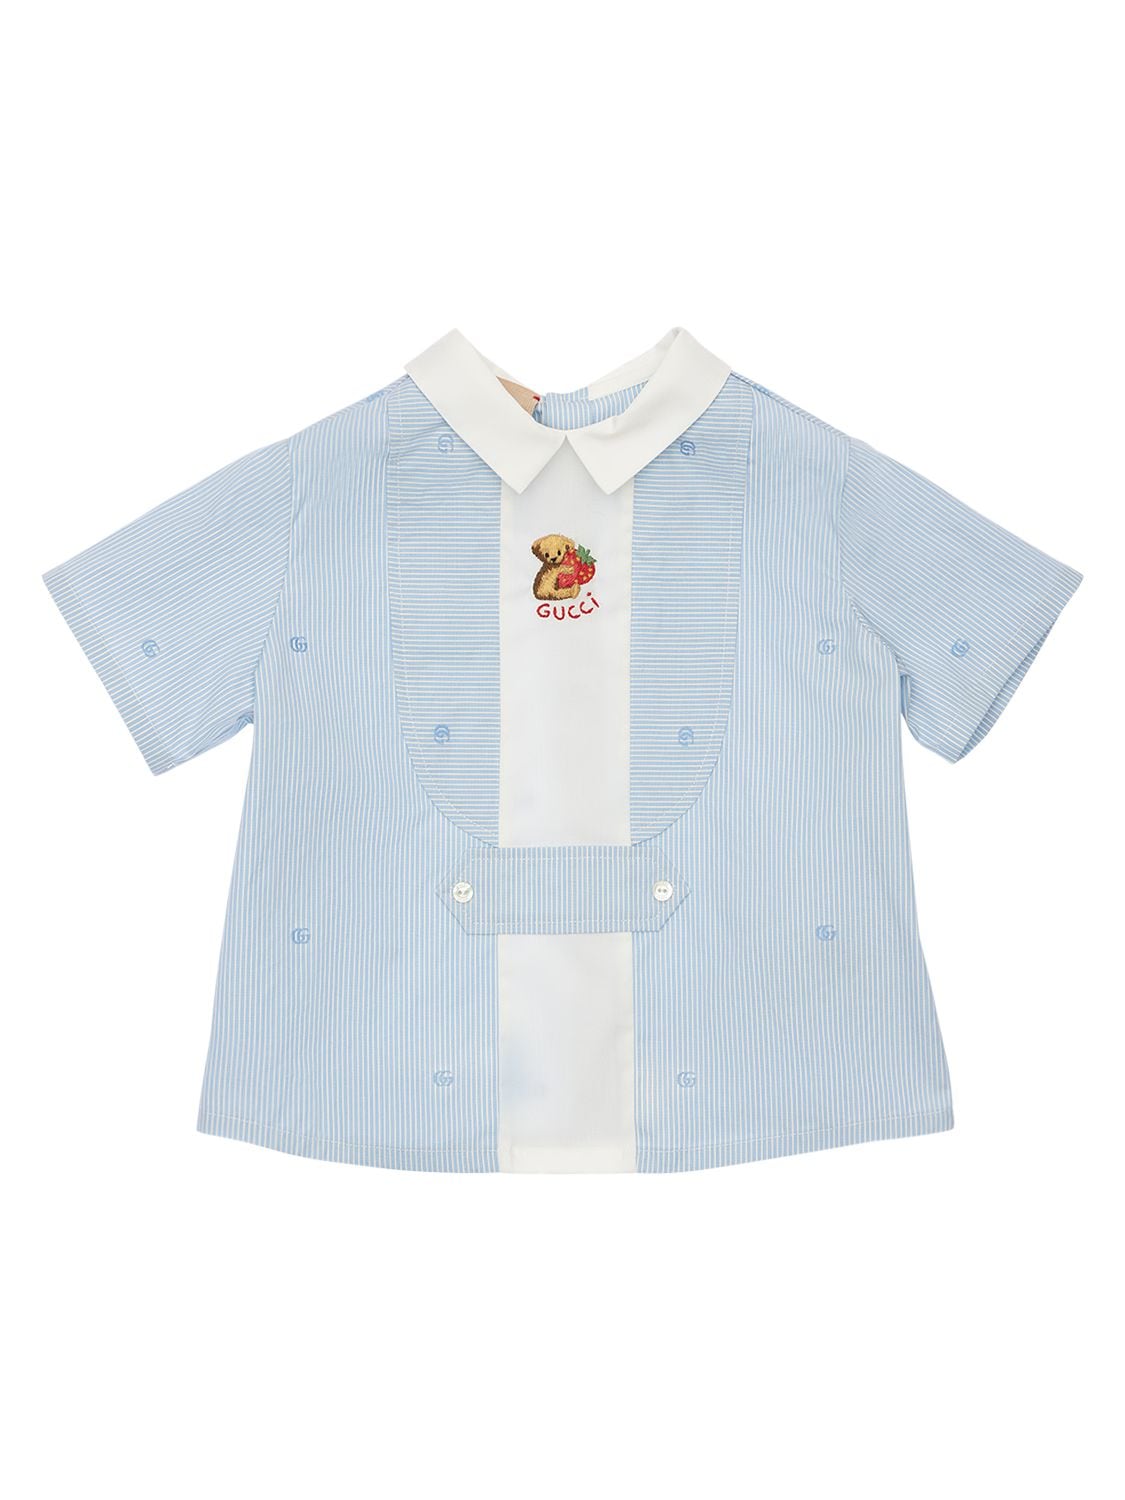 Gucci Kids' Embroidered Striped Cotton Shirt In Light Blue